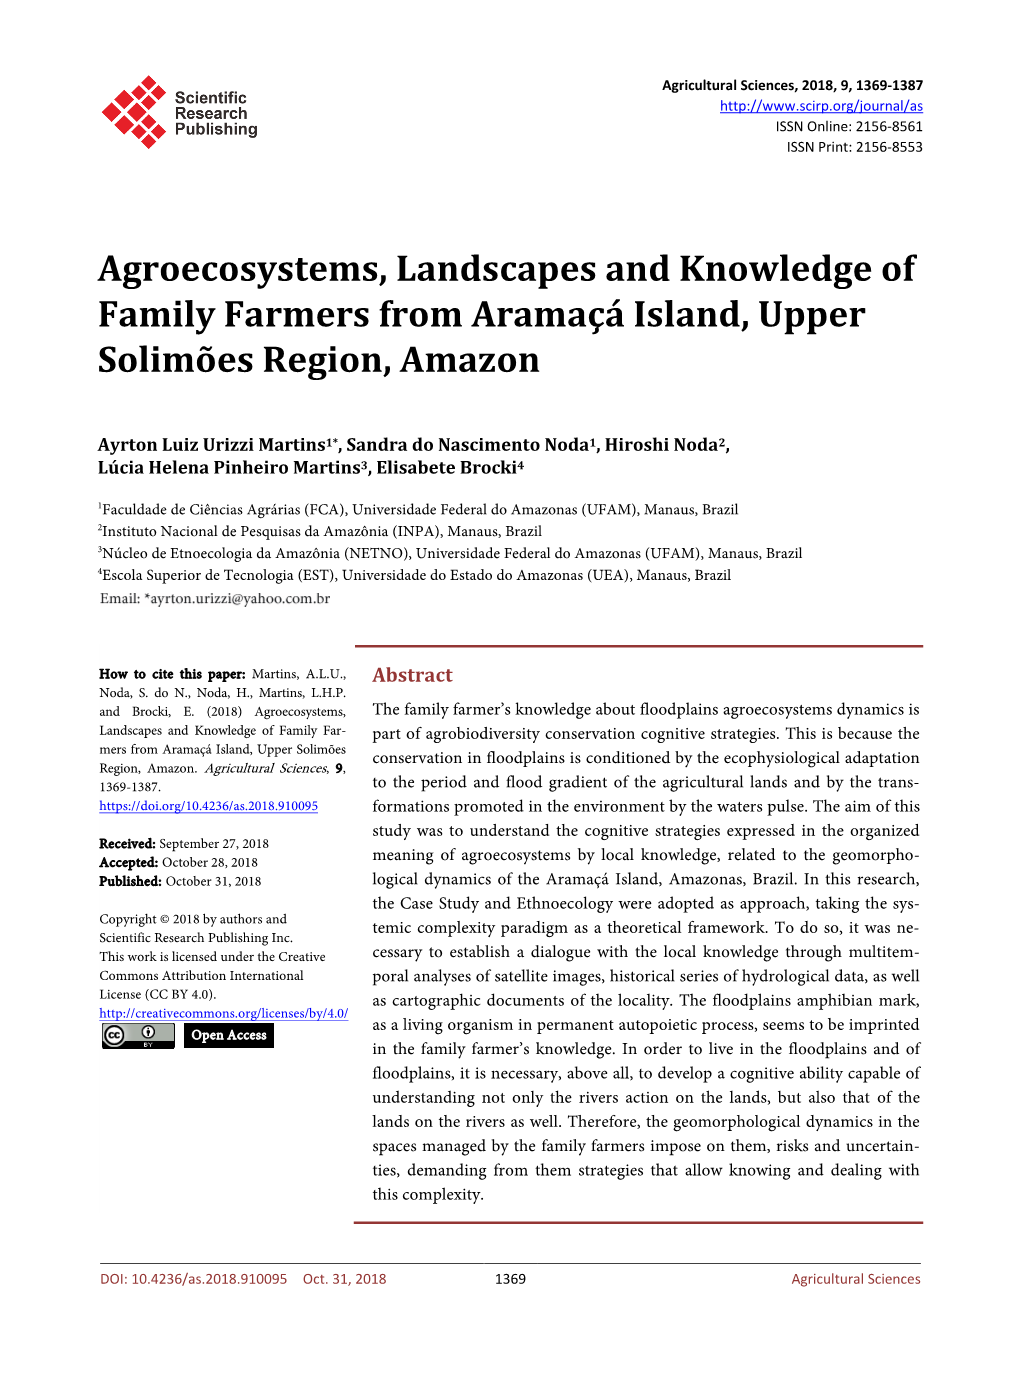 Agroecosystems, Landscapes and Knowledge of Family Farmers from Aramaçá Island, Upper Solimões Region, Amazon